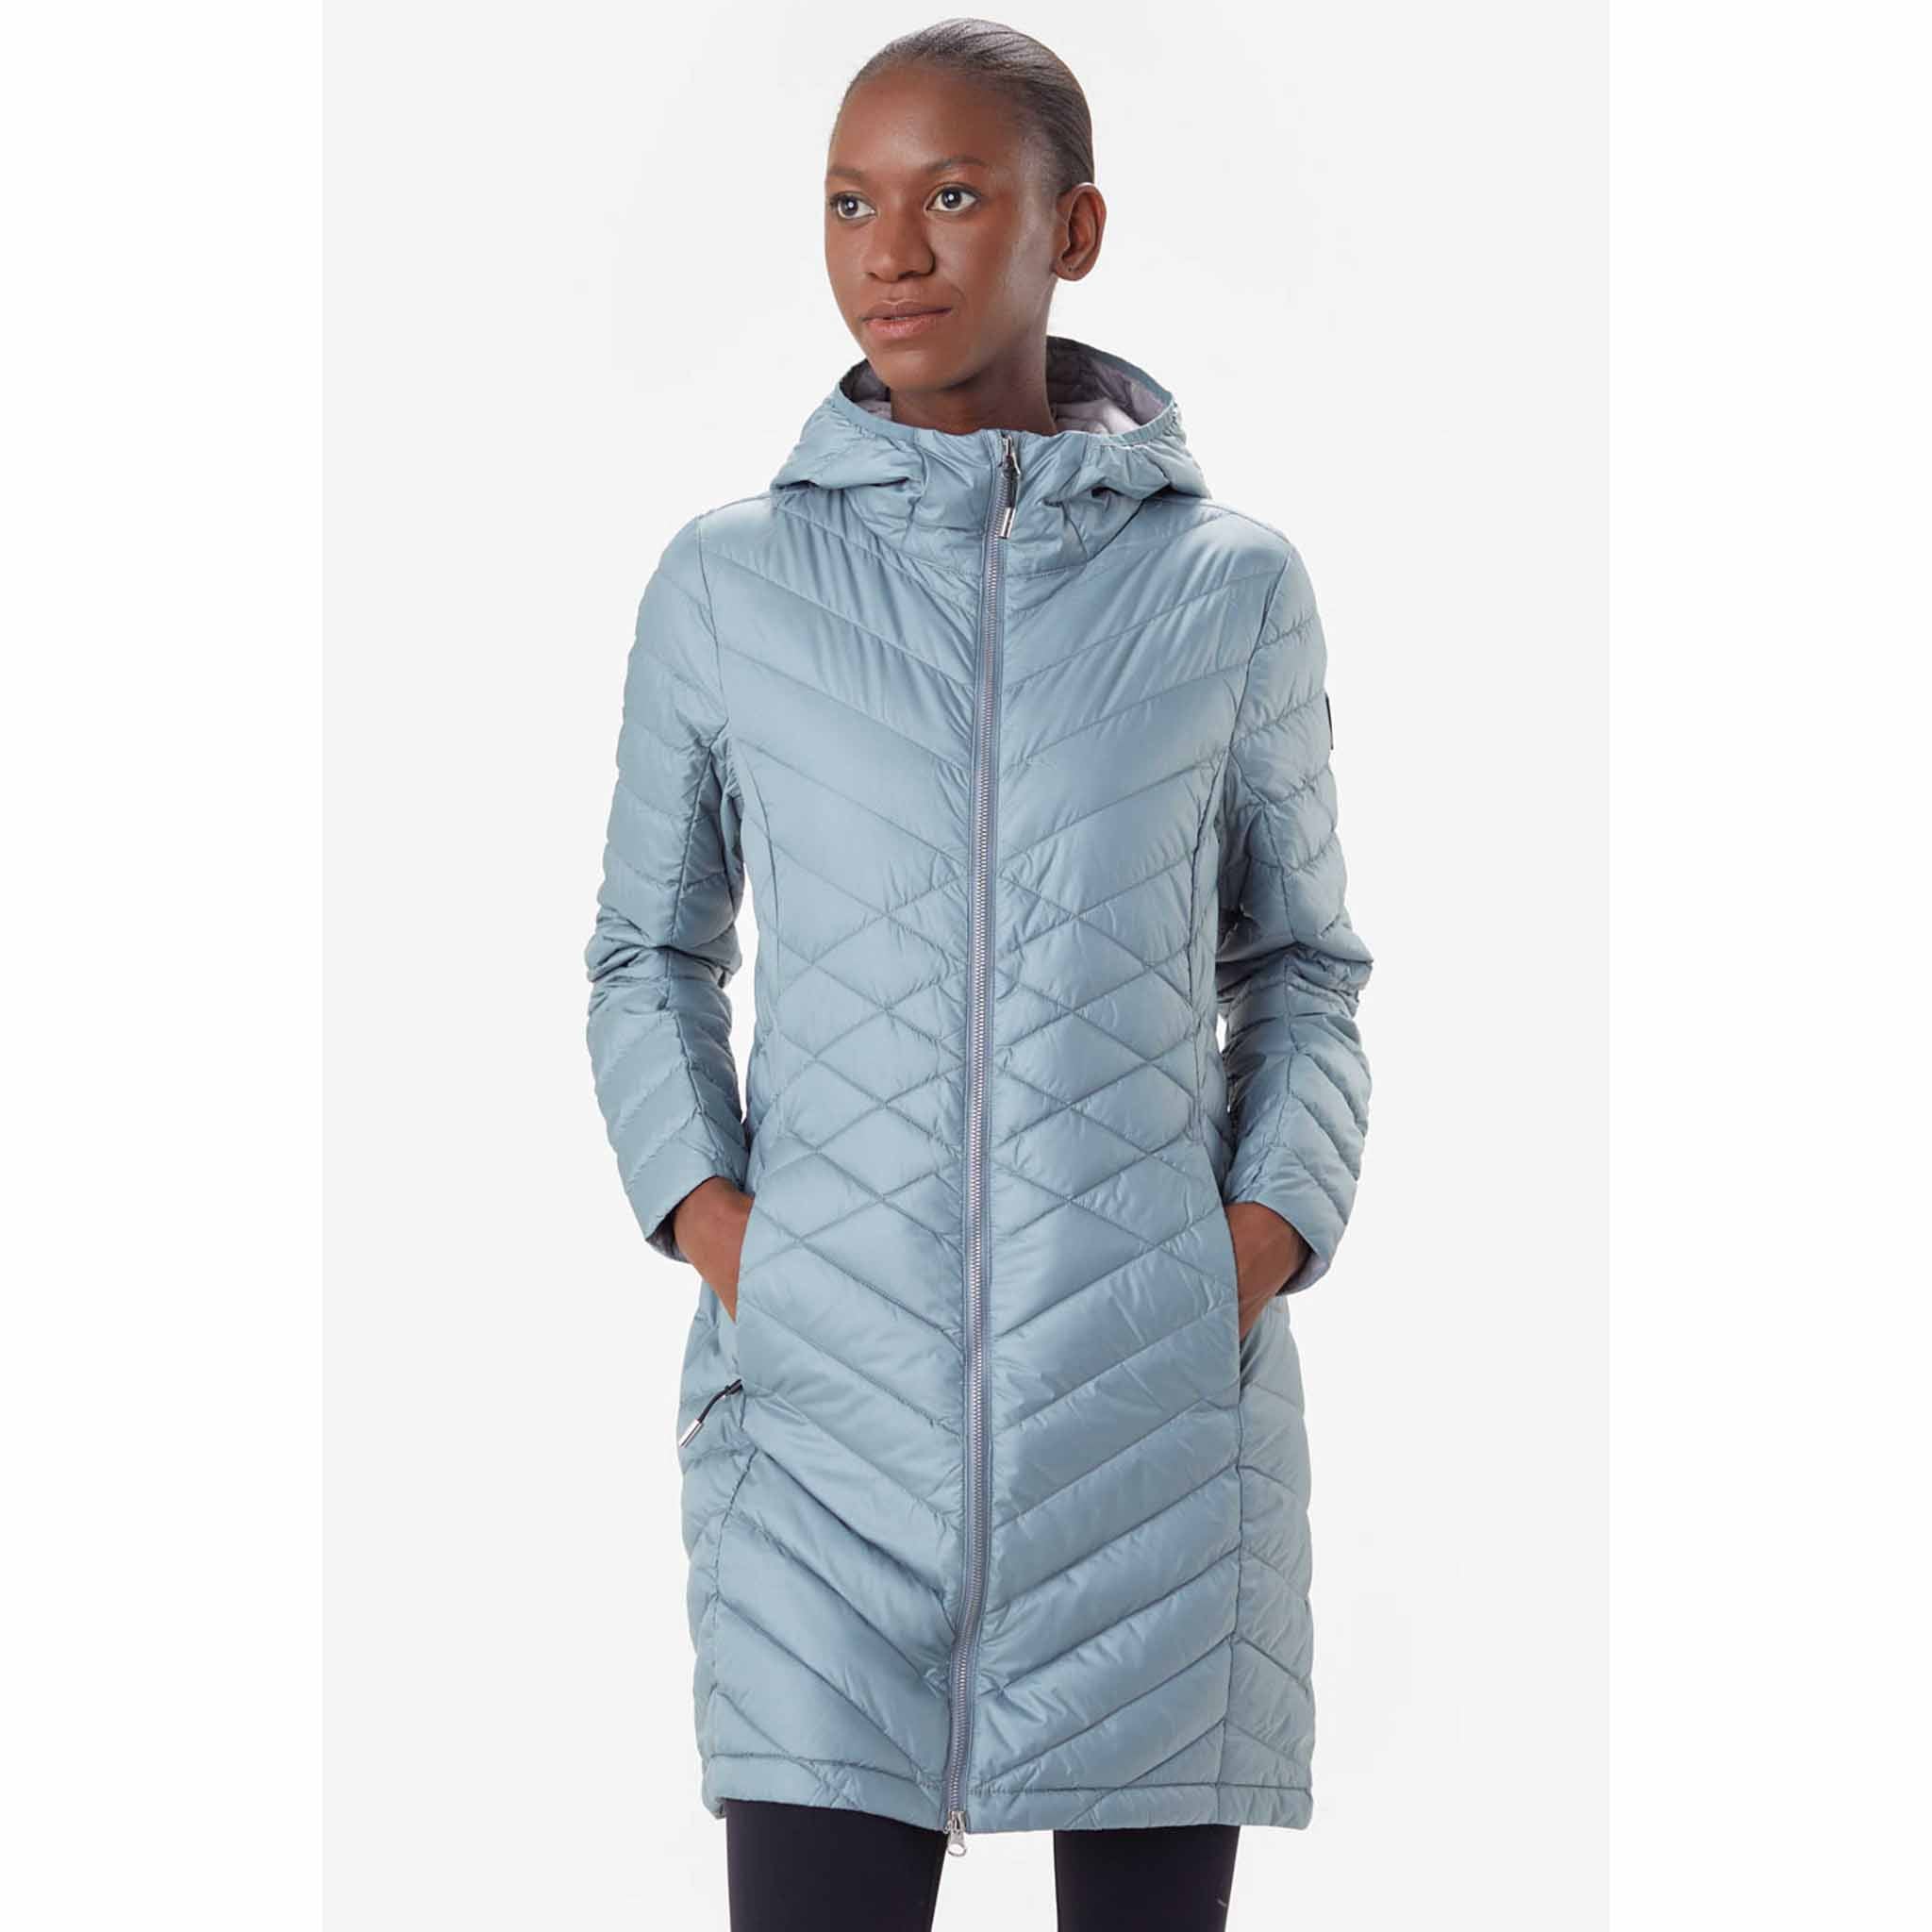 manteau long rugby